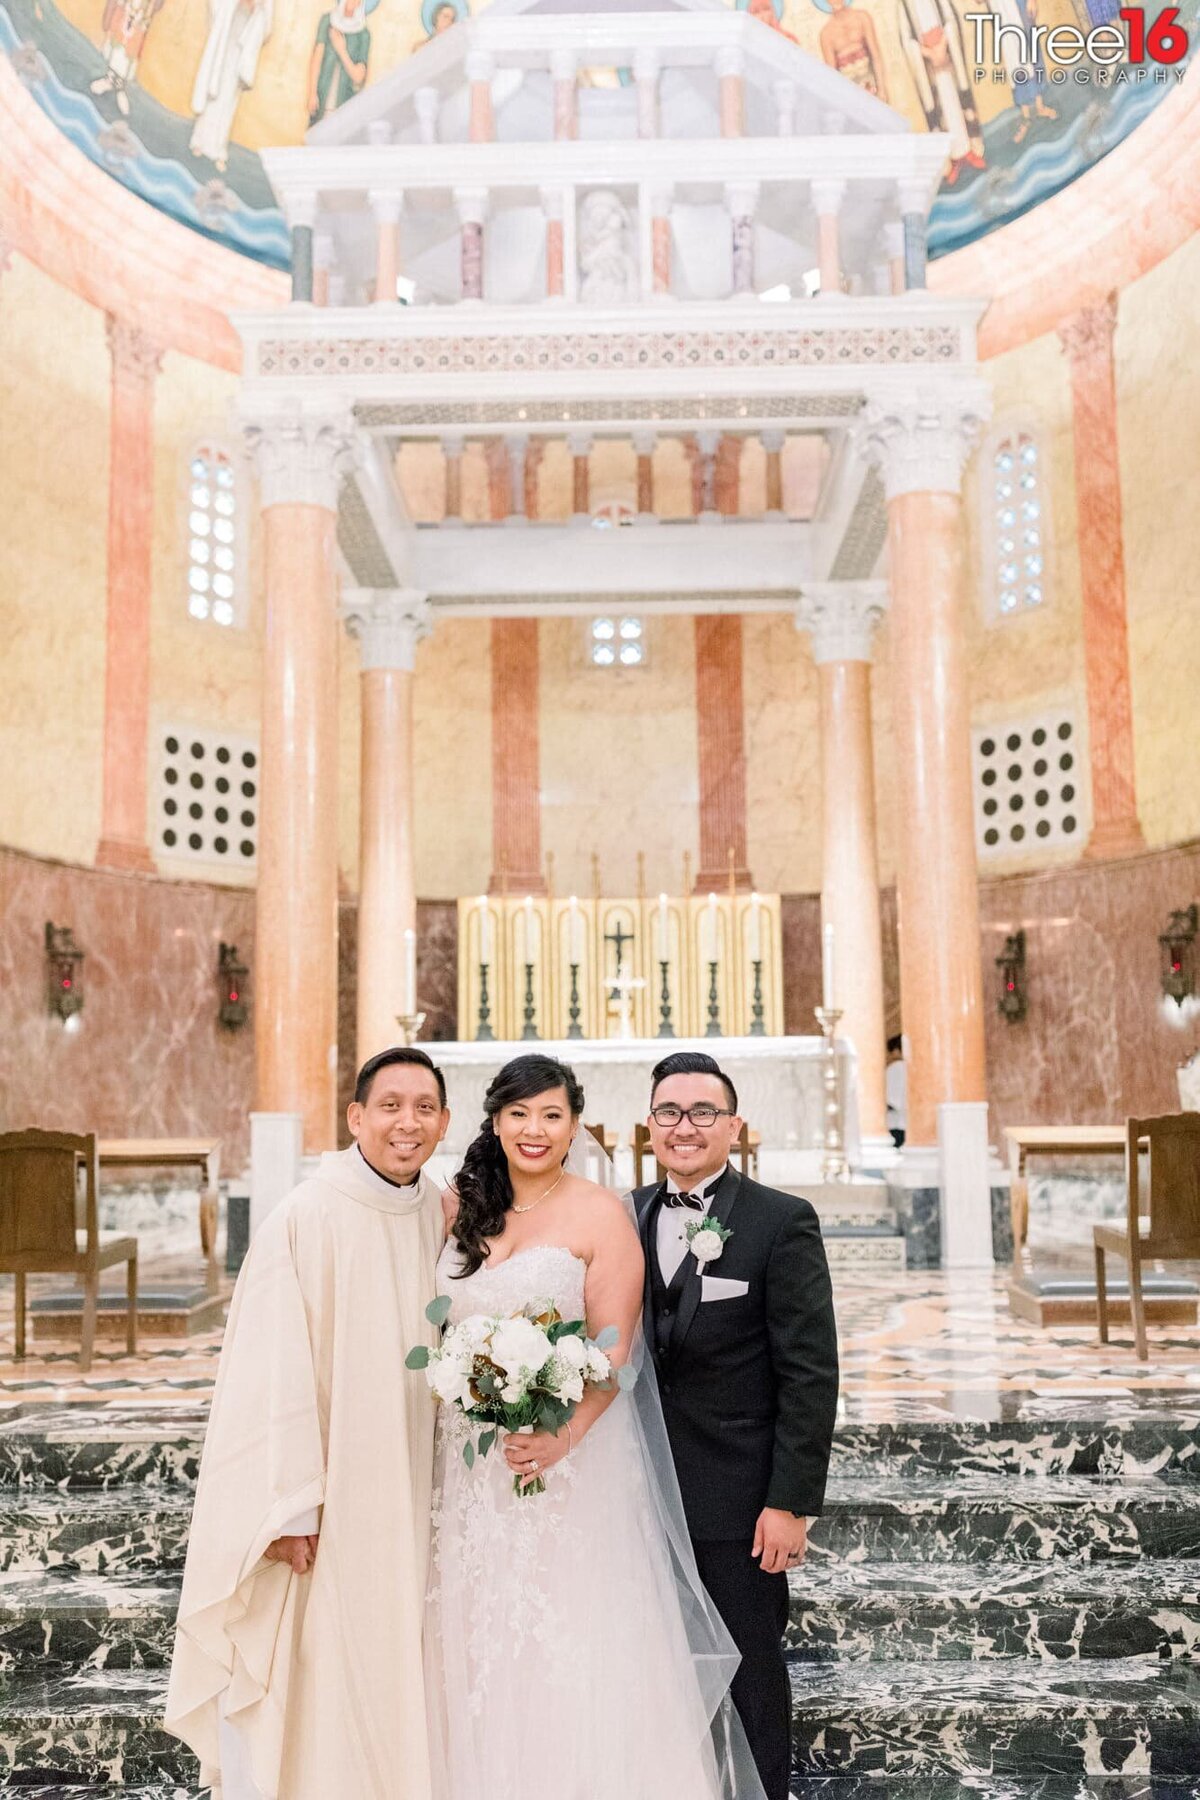 Bride and Groom pose for a photo with the priest inside the church